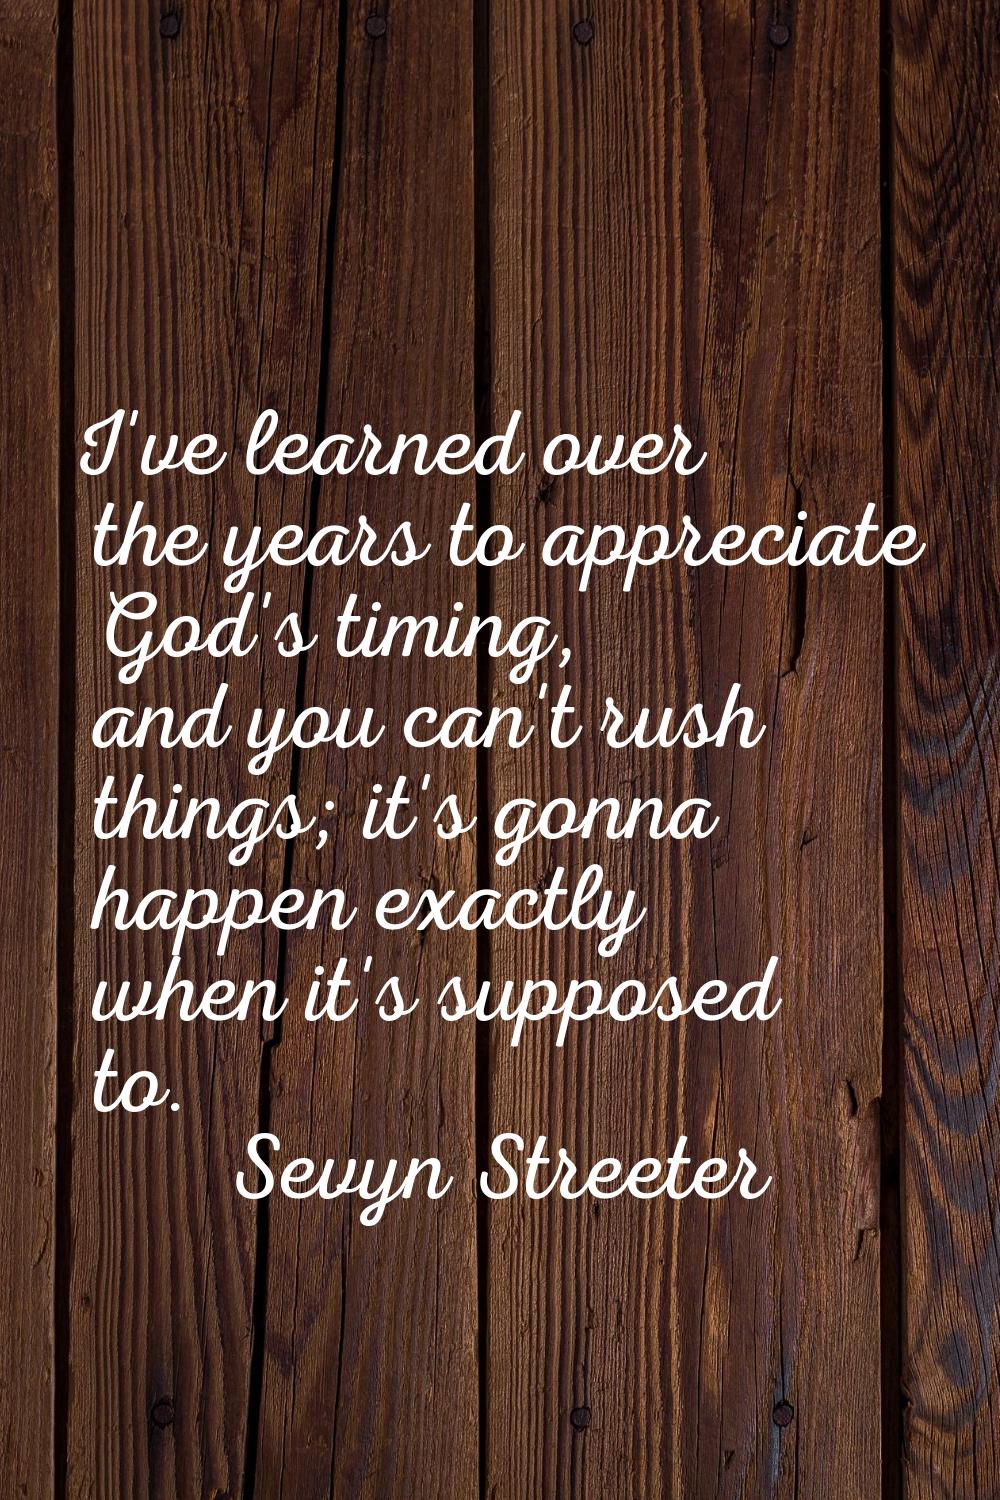 I've learned over the years to appreciate God's timing, and you can't rush things; it's gonna happe